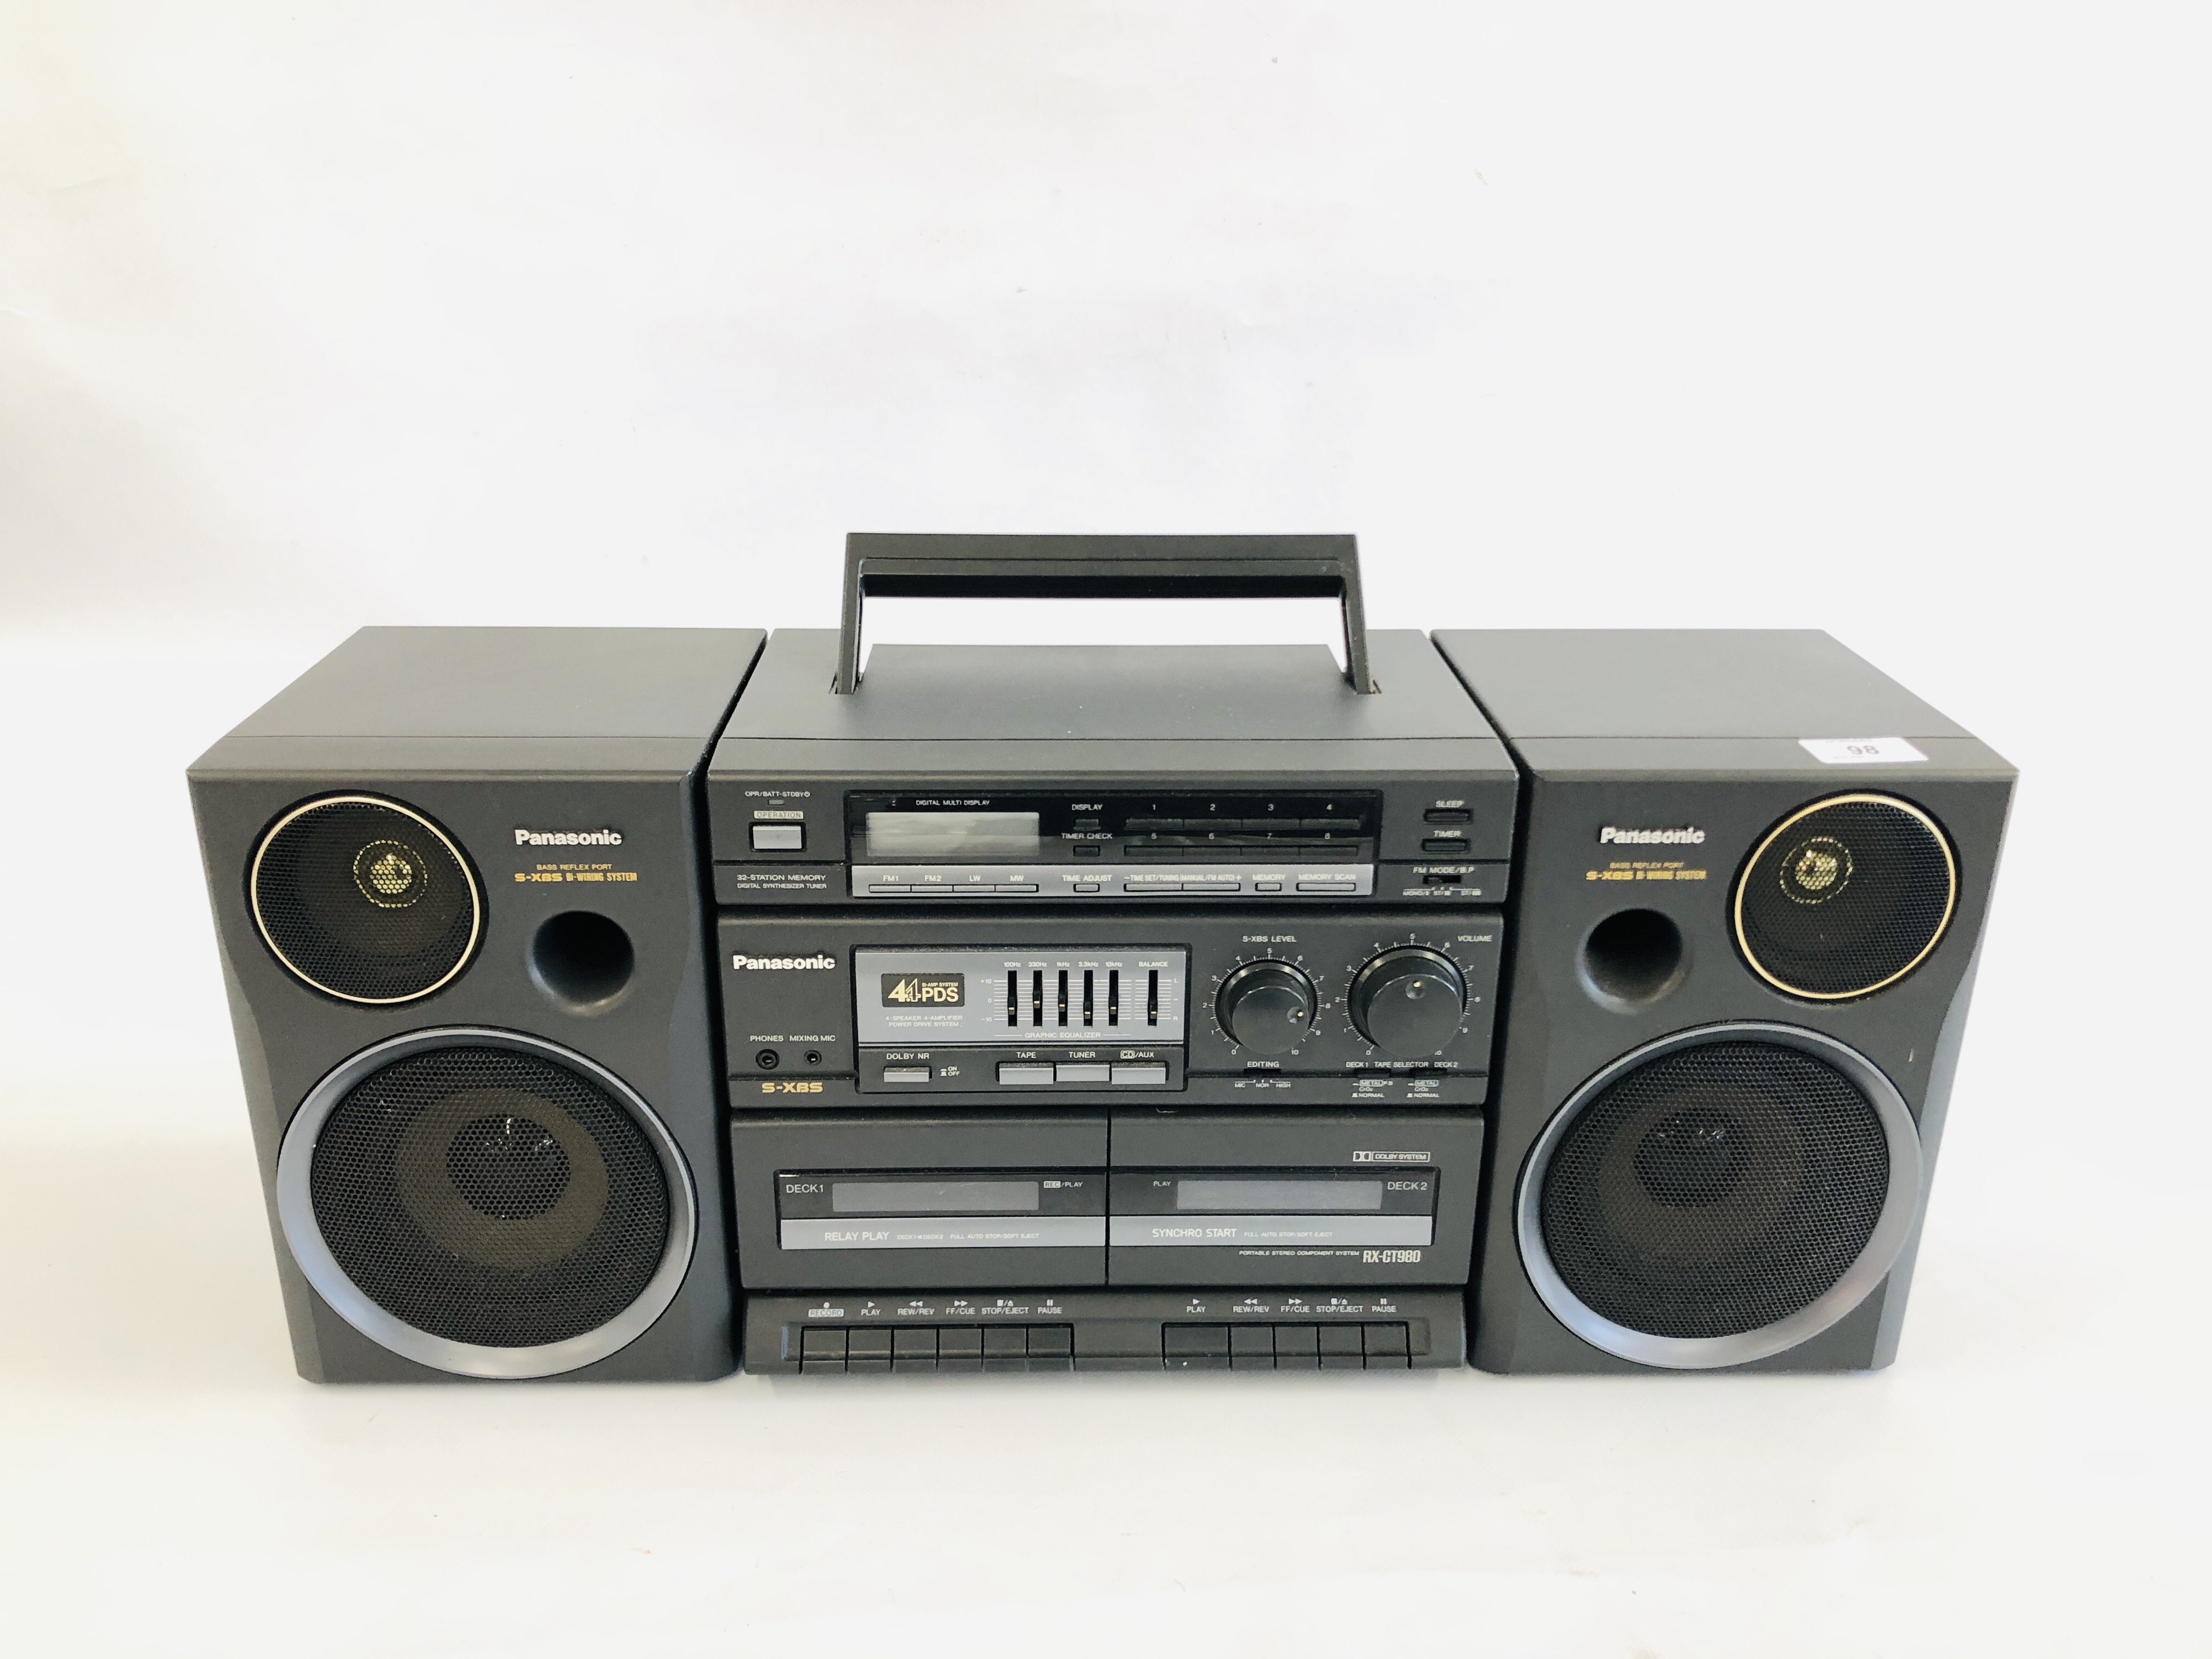 A PANASONIC S-X BS SOUND SYSTEM - SOLD AS SEEN.